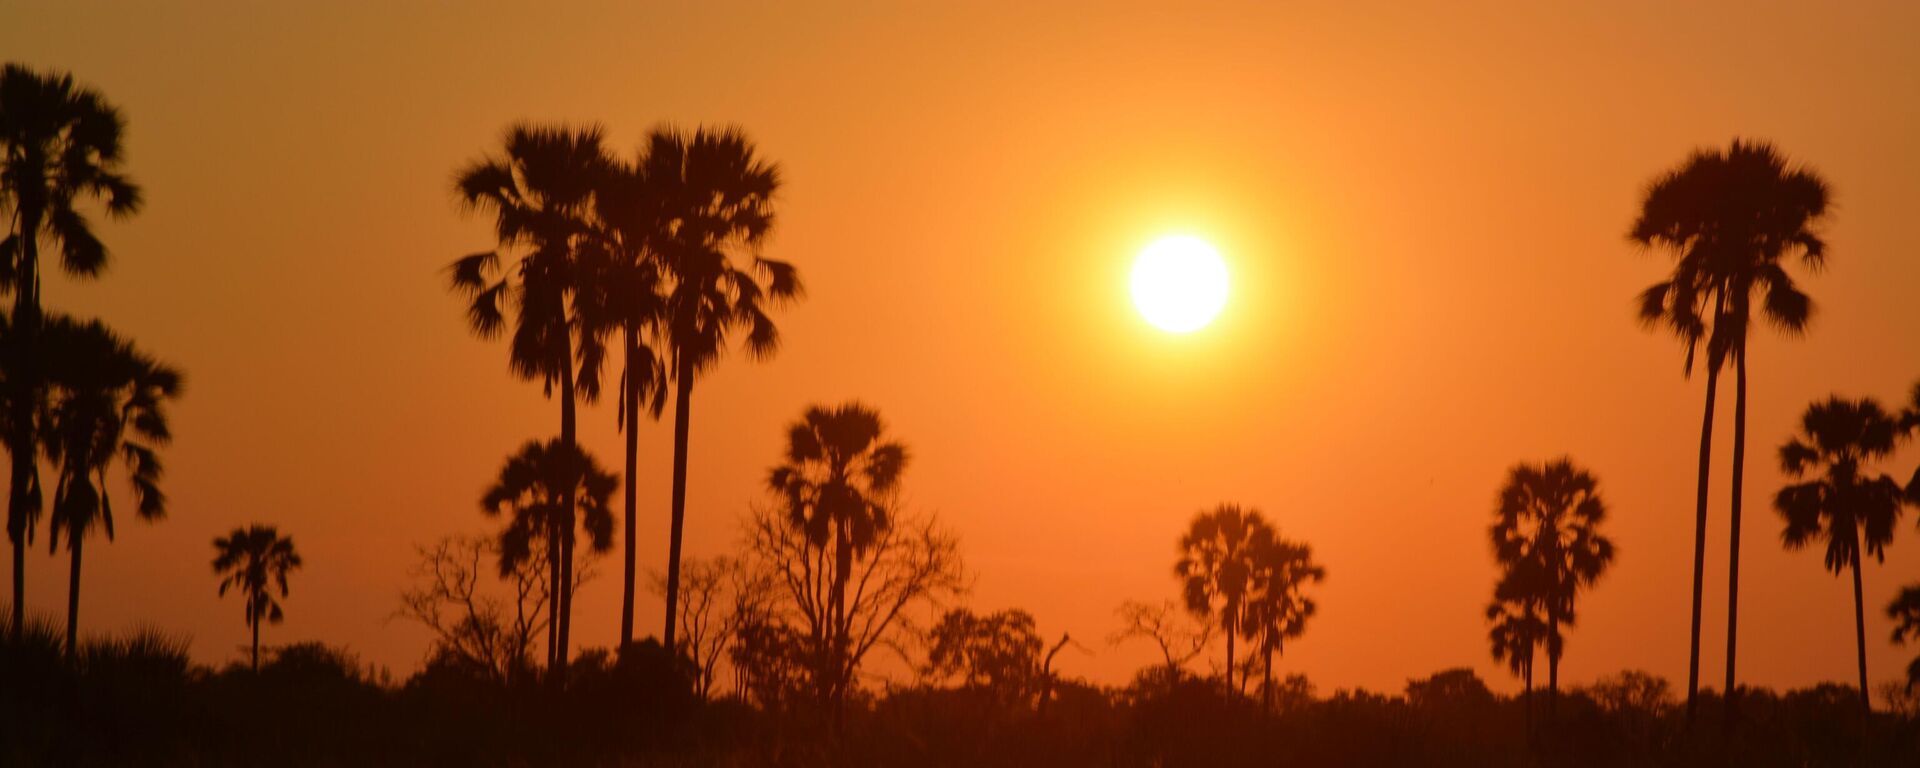 This March 1, 2013 photo shows a sunset in Botswana's Okavango Delta. Trees silhouetted against a bright orange sky lit by a searing white disc is a typical sight for sunsets  in the region, a popular destination for animal-watching safaris. - Sputnik International, 1920, 10.11.2022